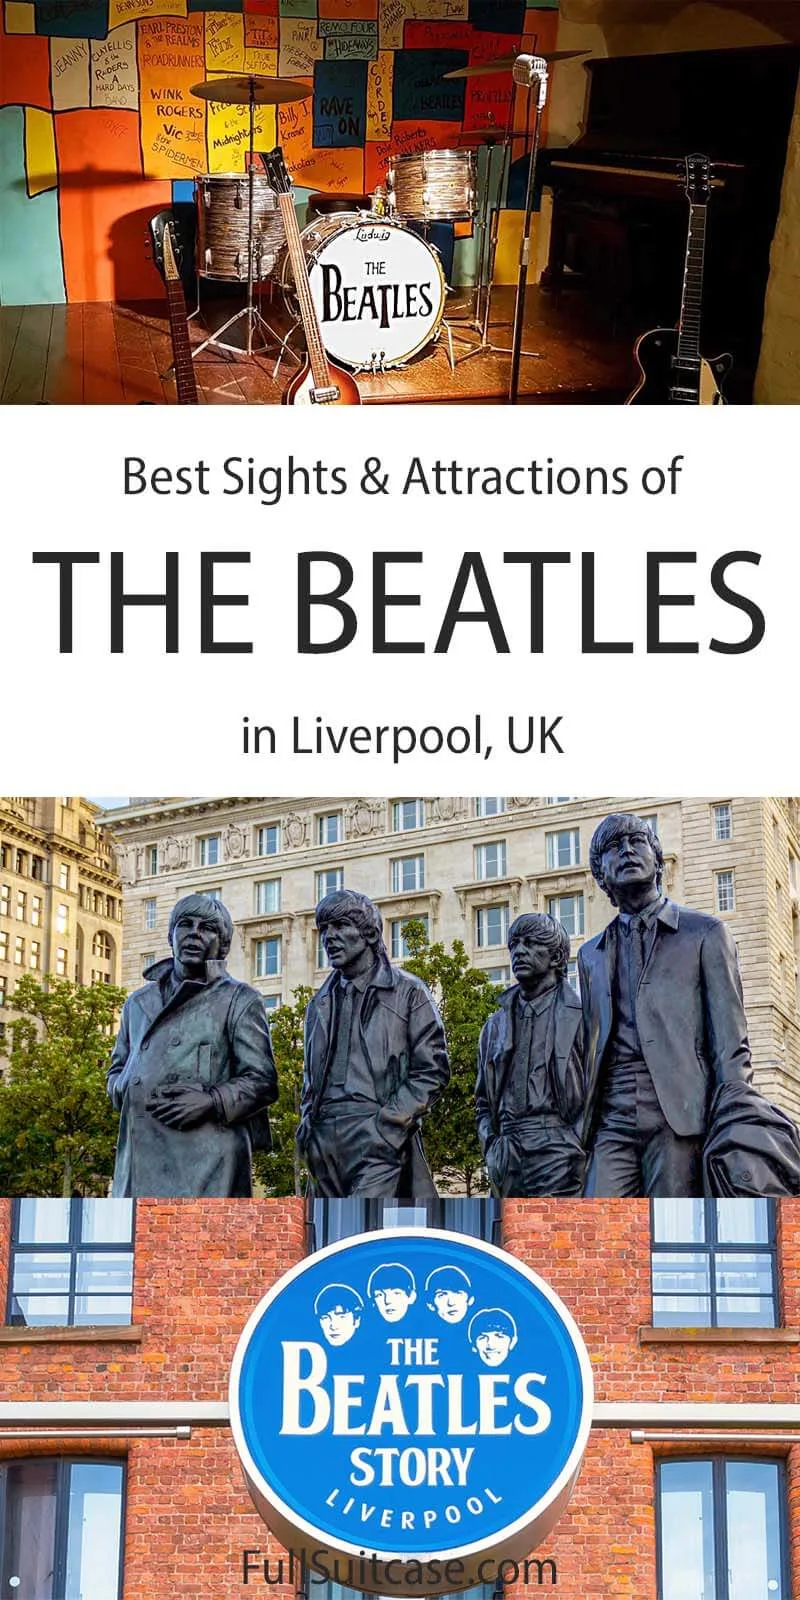 Best sights and attractions of The Beatles in Liverpool, UK